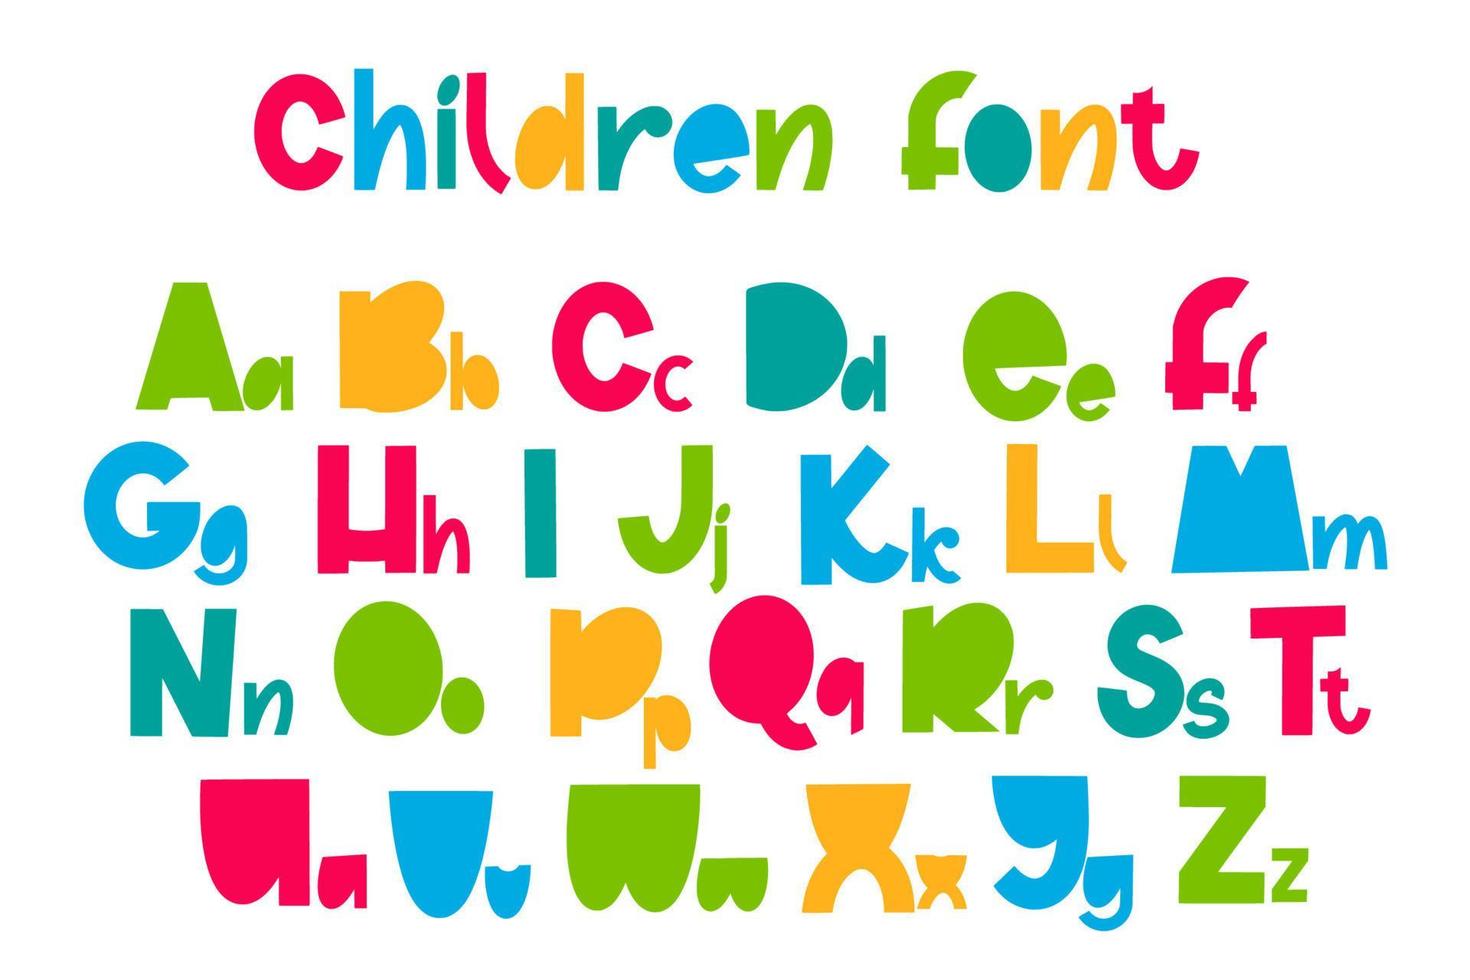 Children's font in the cartoon style. vector